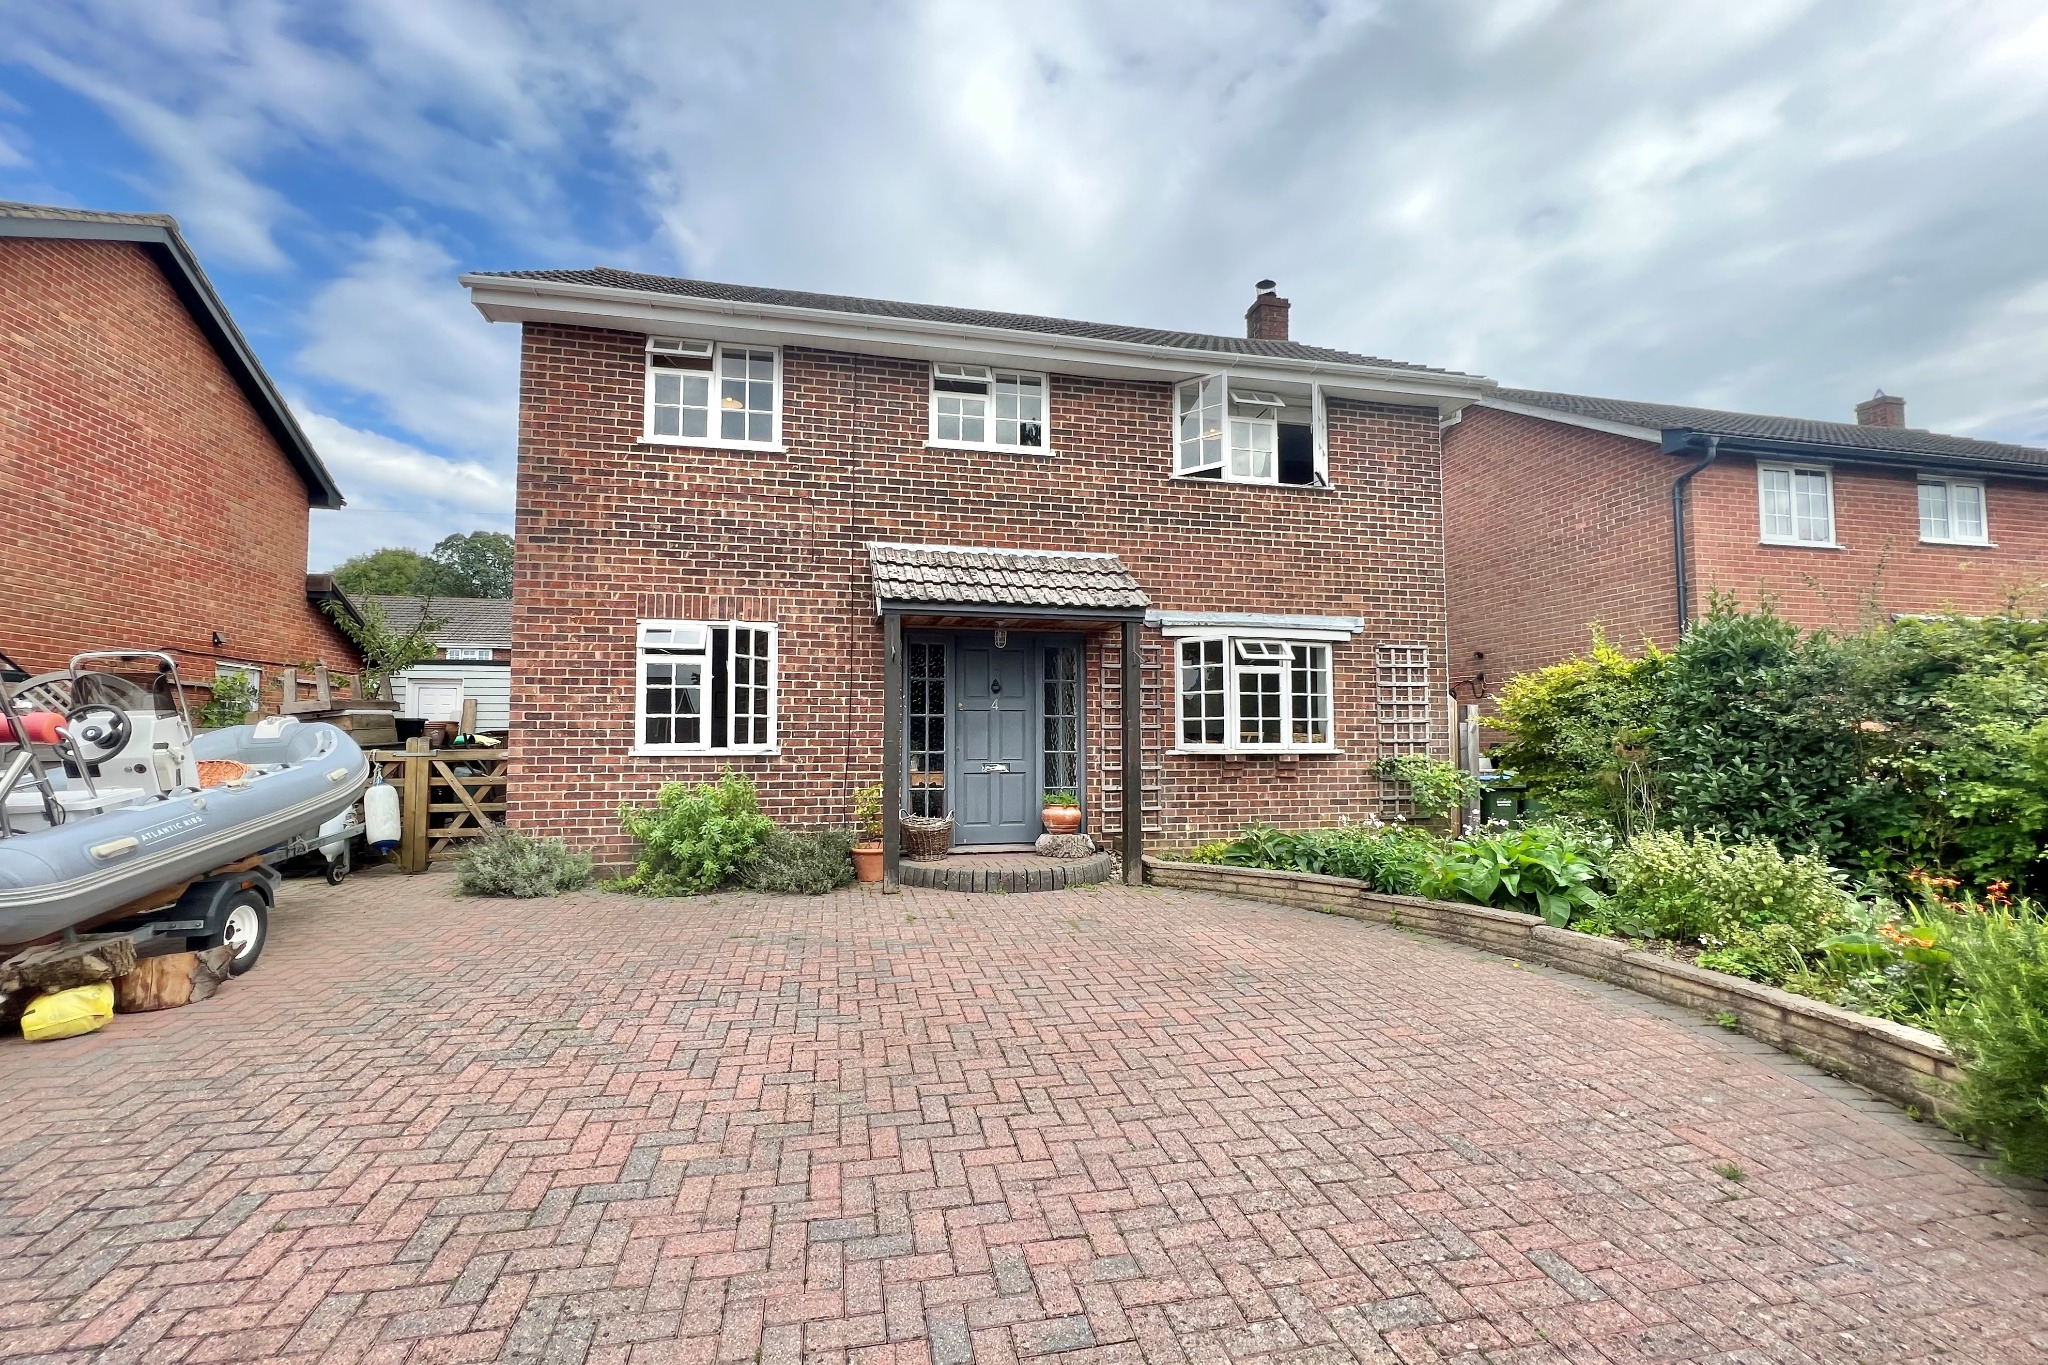 4 bed detached house for sale in Locks Heath, Southampton - Property Image 1